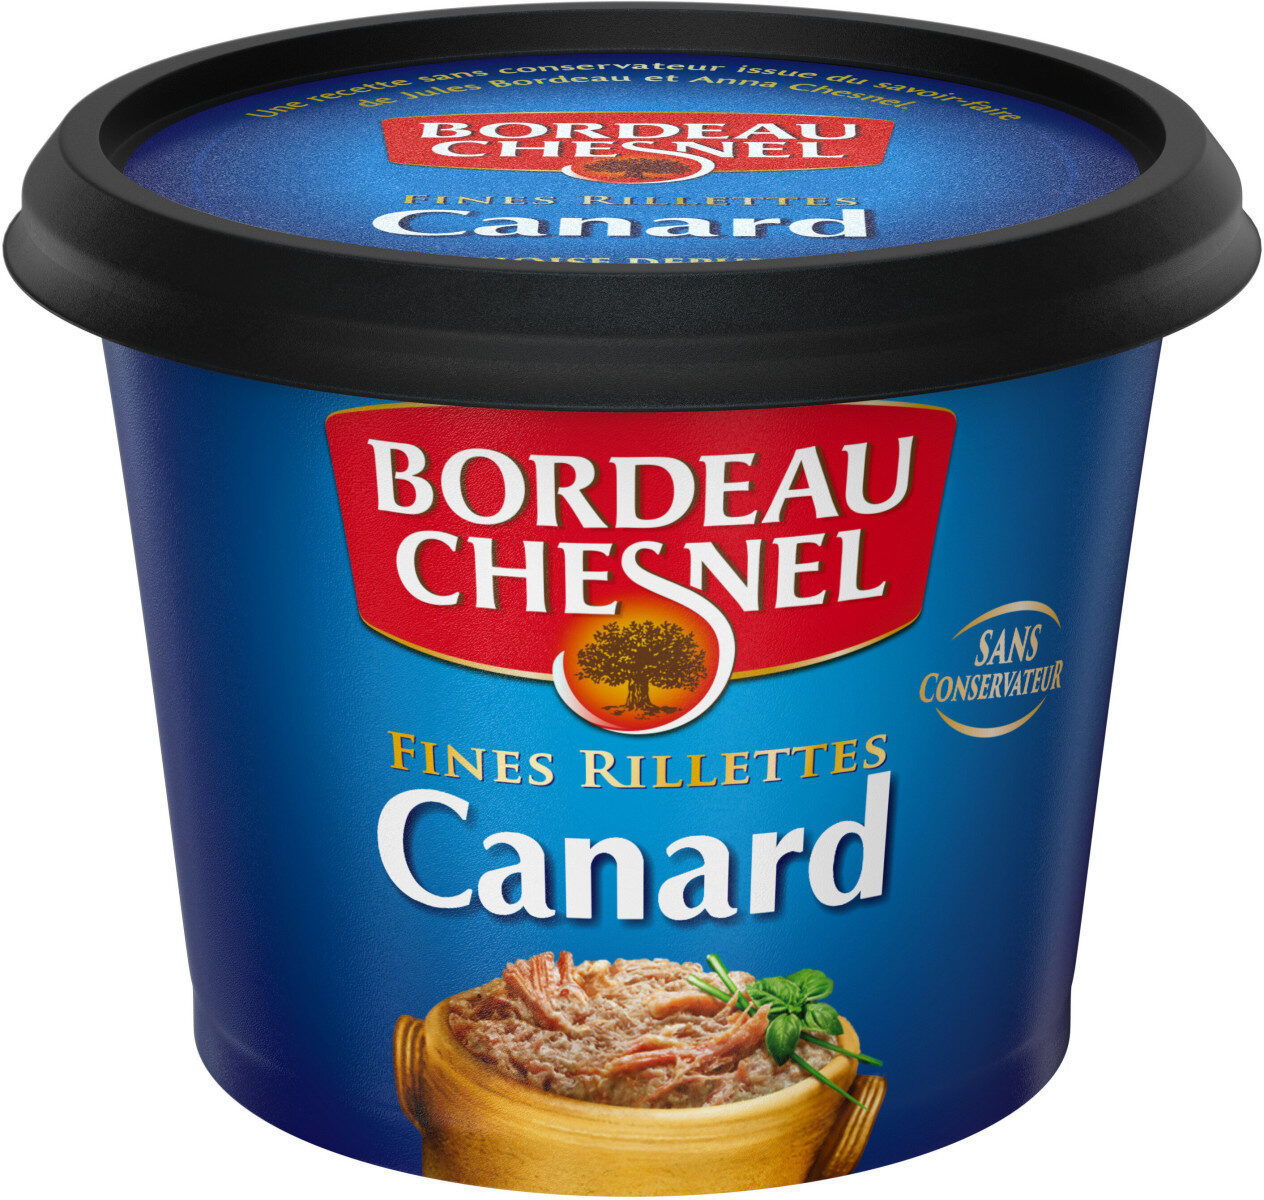 Fines rillettes Canard - Product - fr